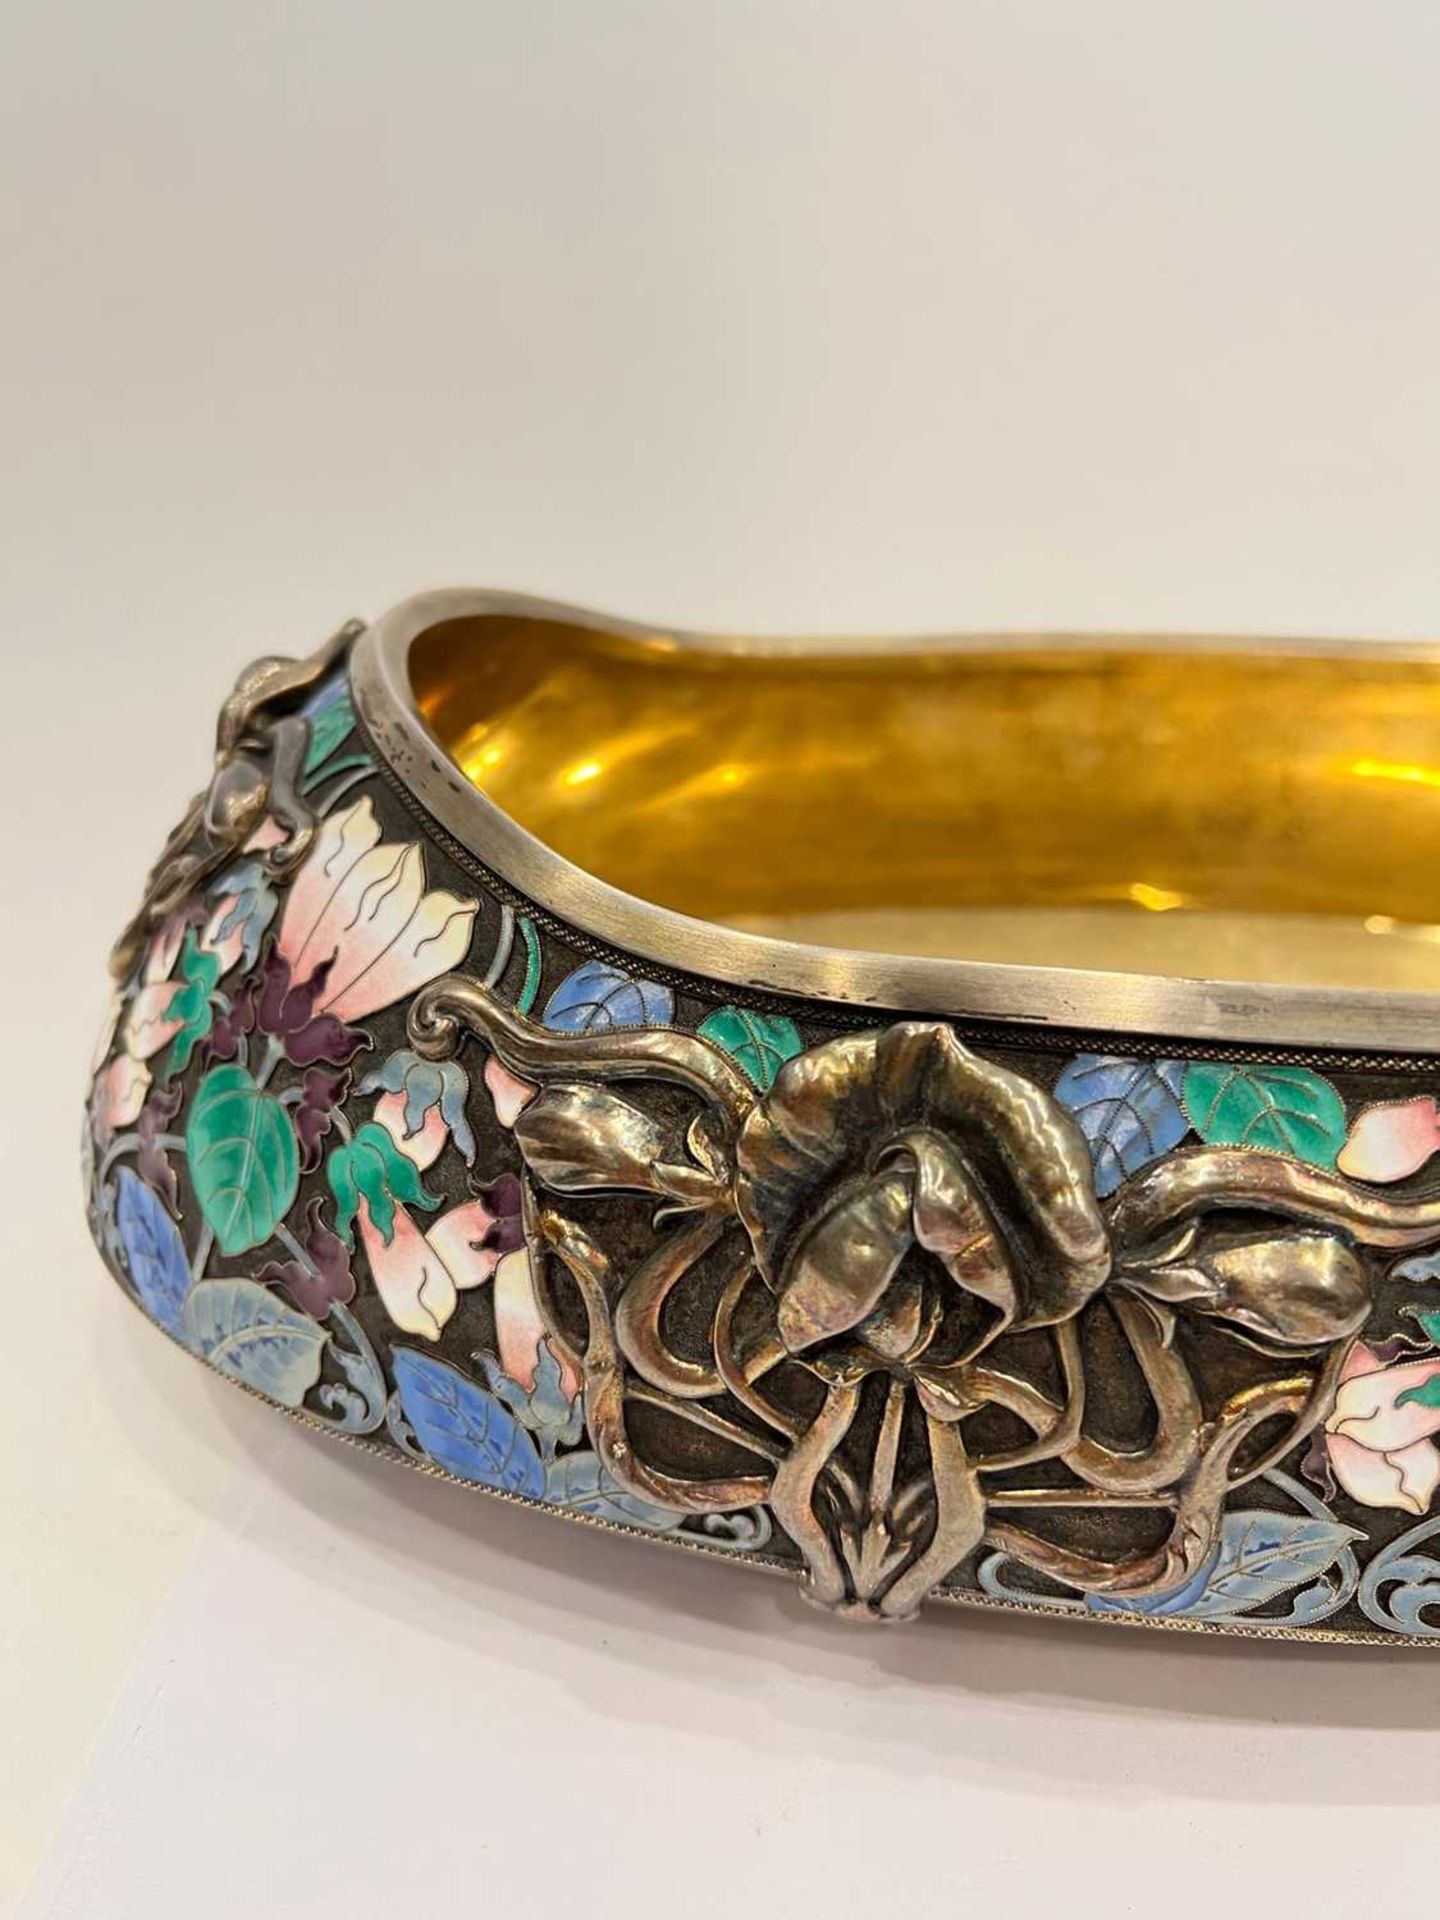 A MASSIVE EARLY 20TH CENTURY RUSSIAN SILVER AND ENAMEL KOVSH IN THE FORM OF A SWAN - Image 6 of 28